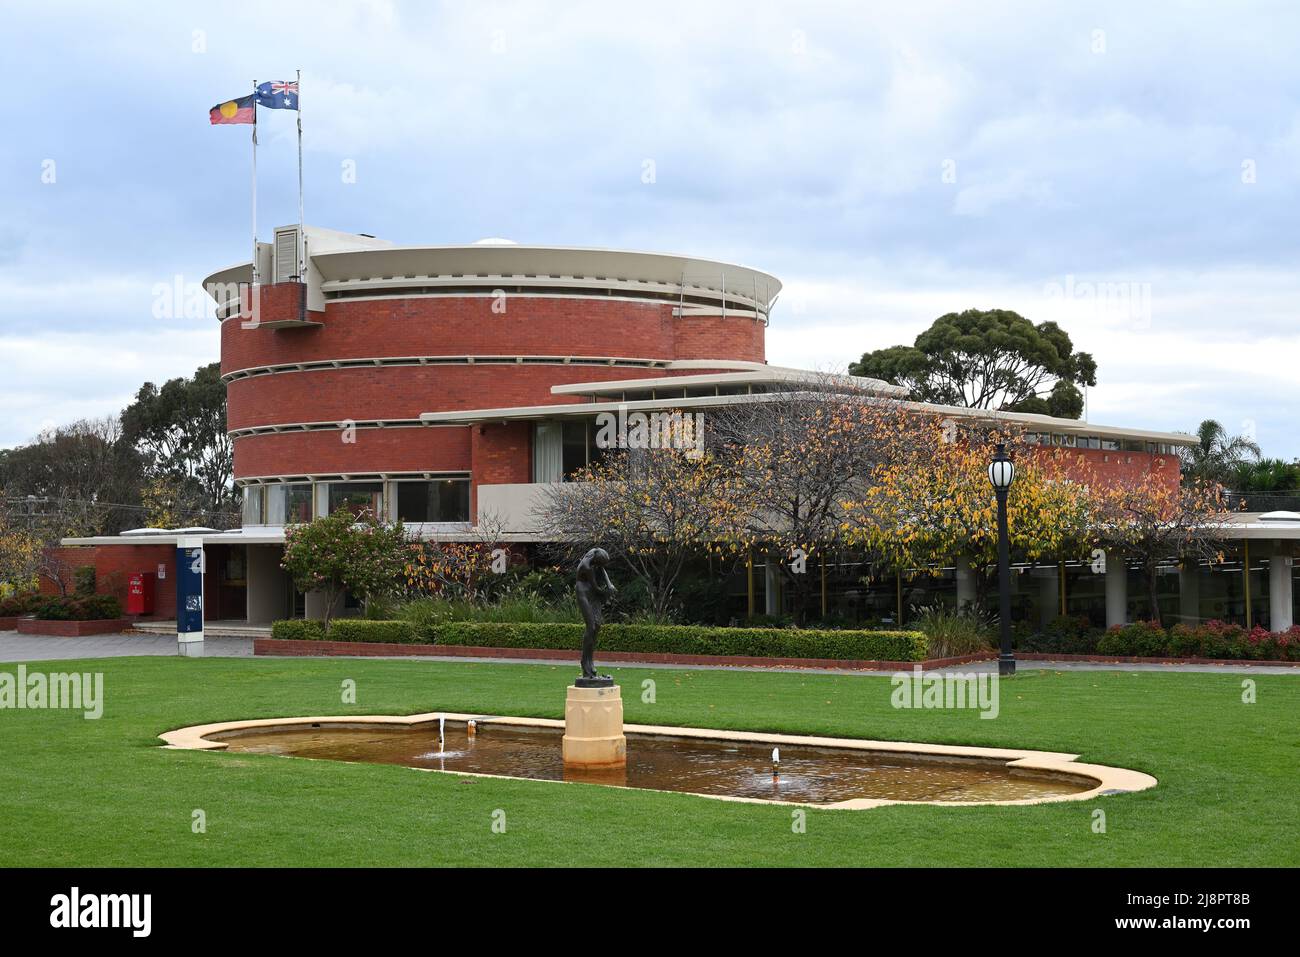 Garden, featuring lawn, a shallow pool, and sculpture, next to circular Bayside Council Chamber and Brighton Library, both in the background Stock Photo